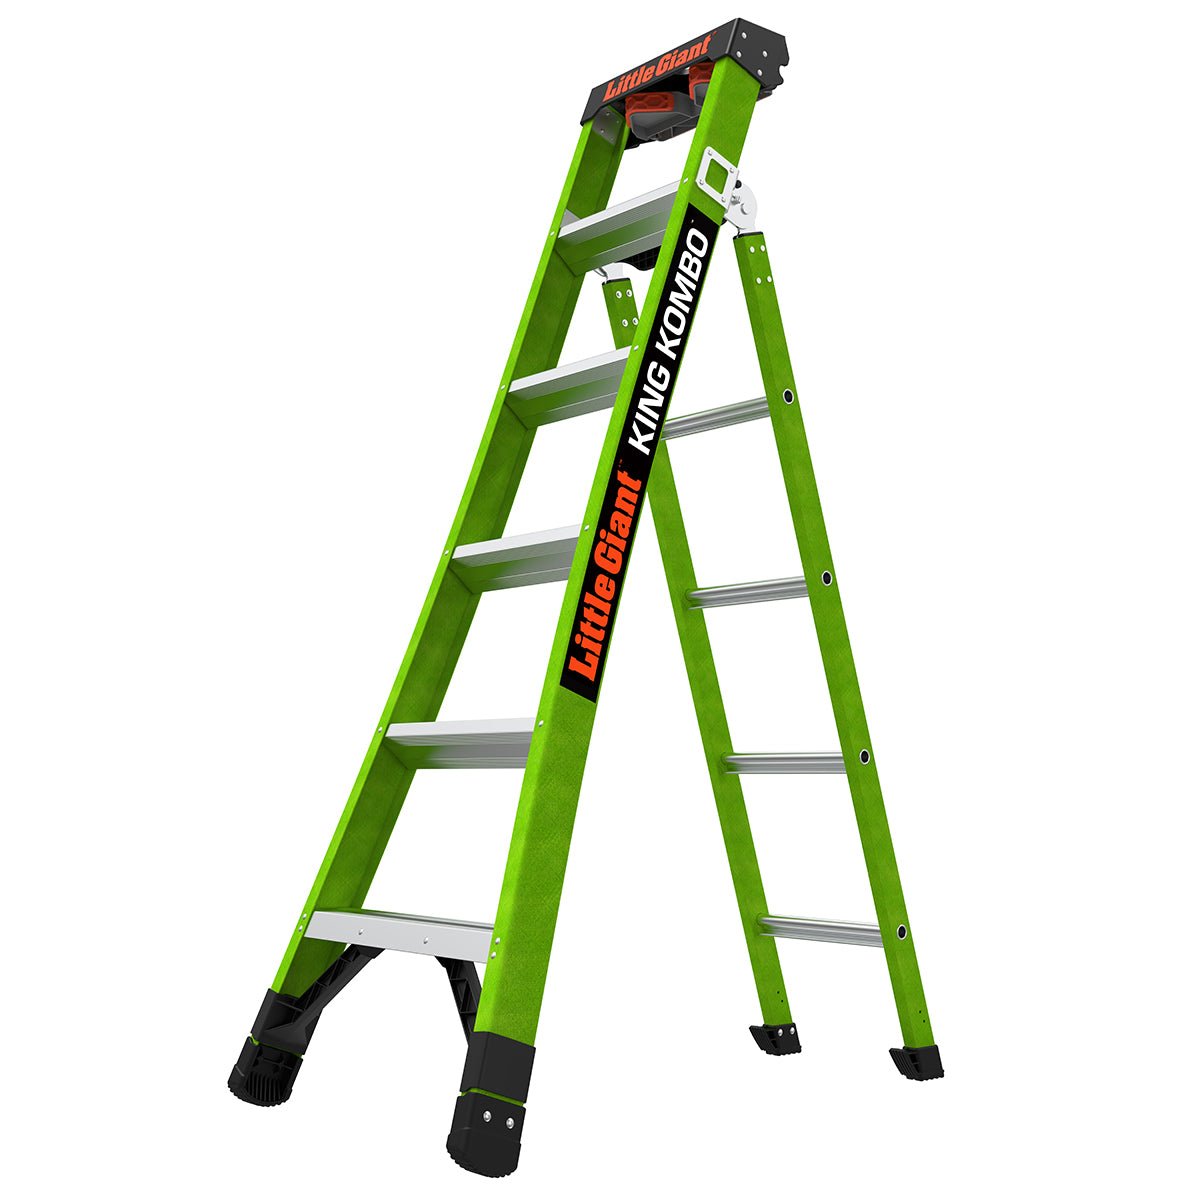 Little Giant 13906-303 - KING KOMBO, Professional, M6, 6’- CSA Grade Type IAA – 375 lb/170 kg Rated, Fiberglass, 3-in-1 Combination Ladder, Rotating Wall Pad, GRIP-N-GO Single-Hand Release Hinge